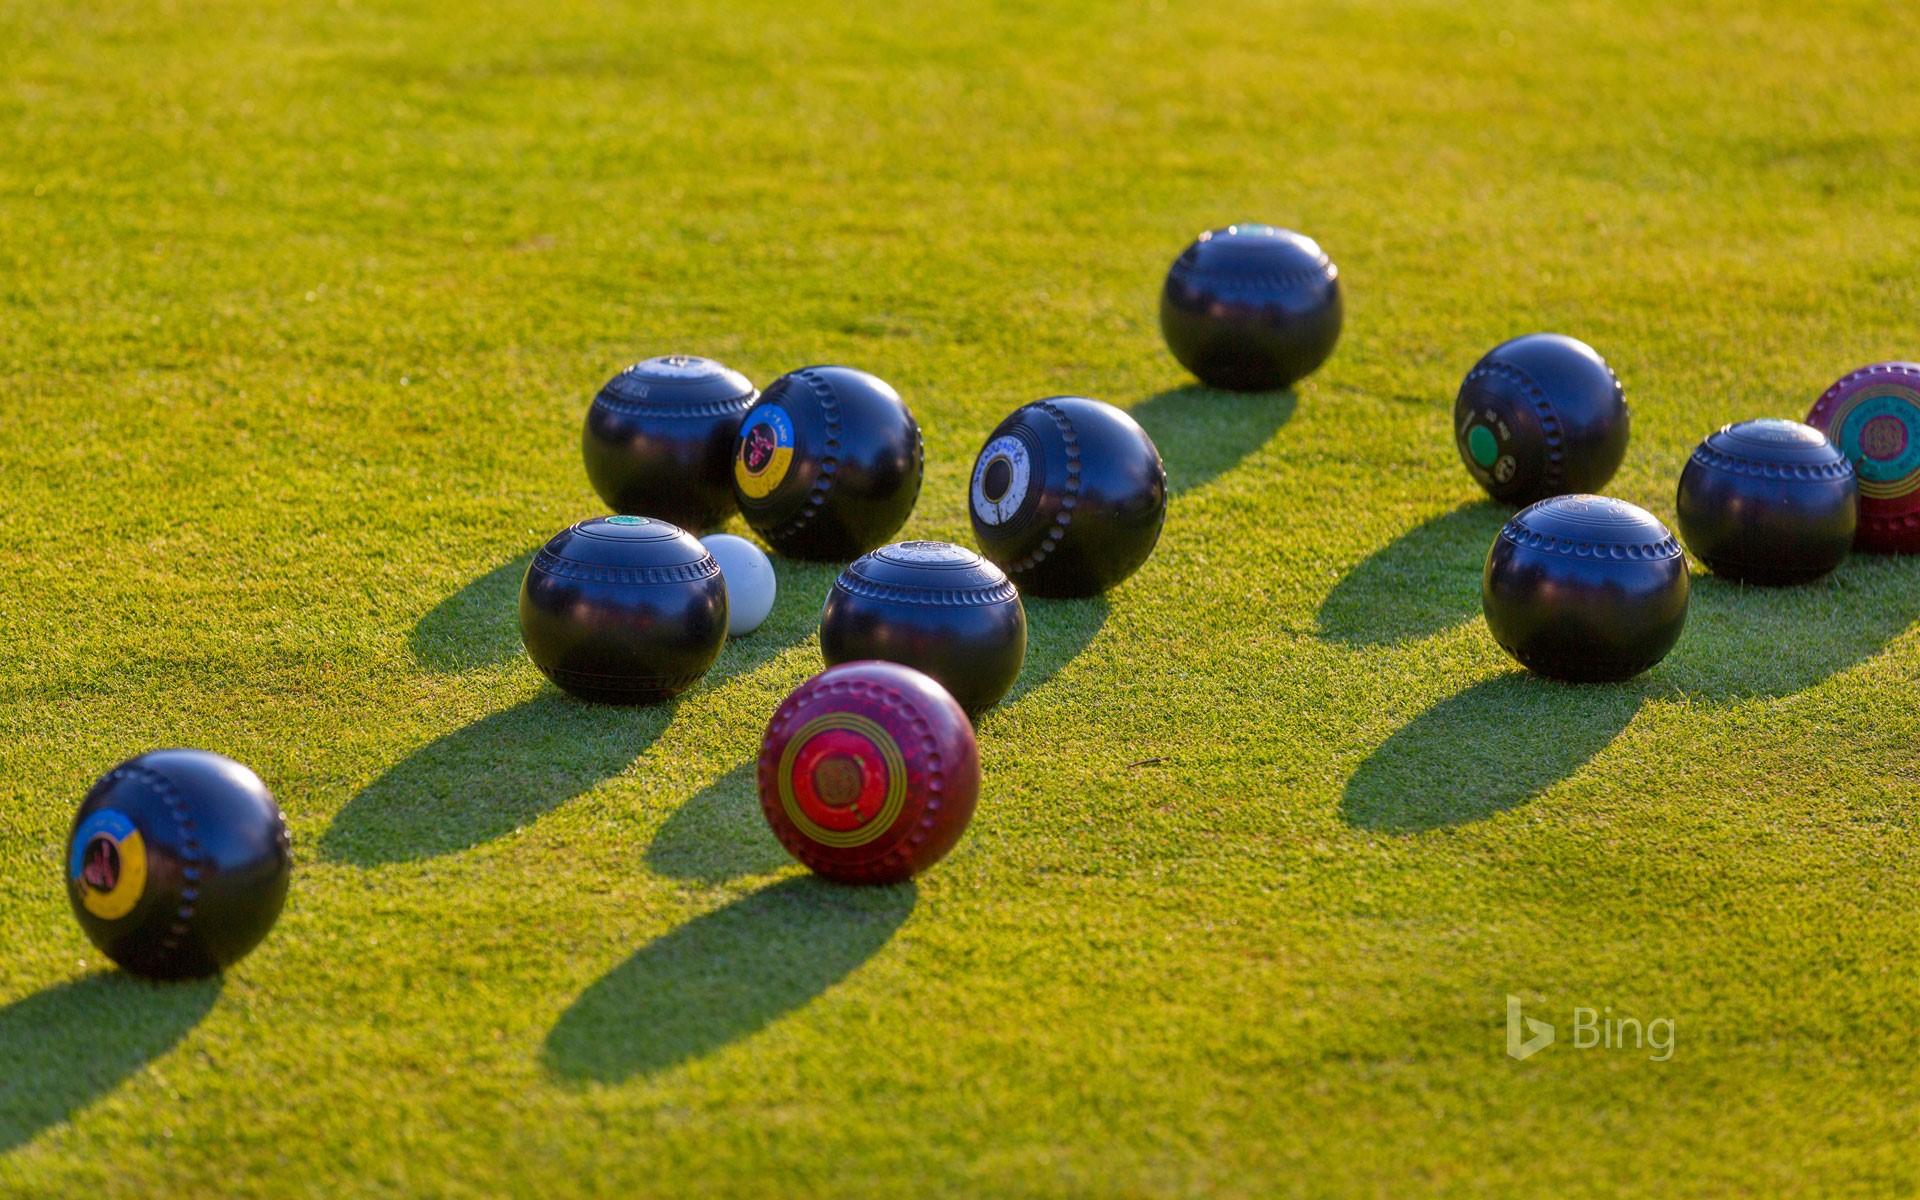 Close-up of a lawn bowling game